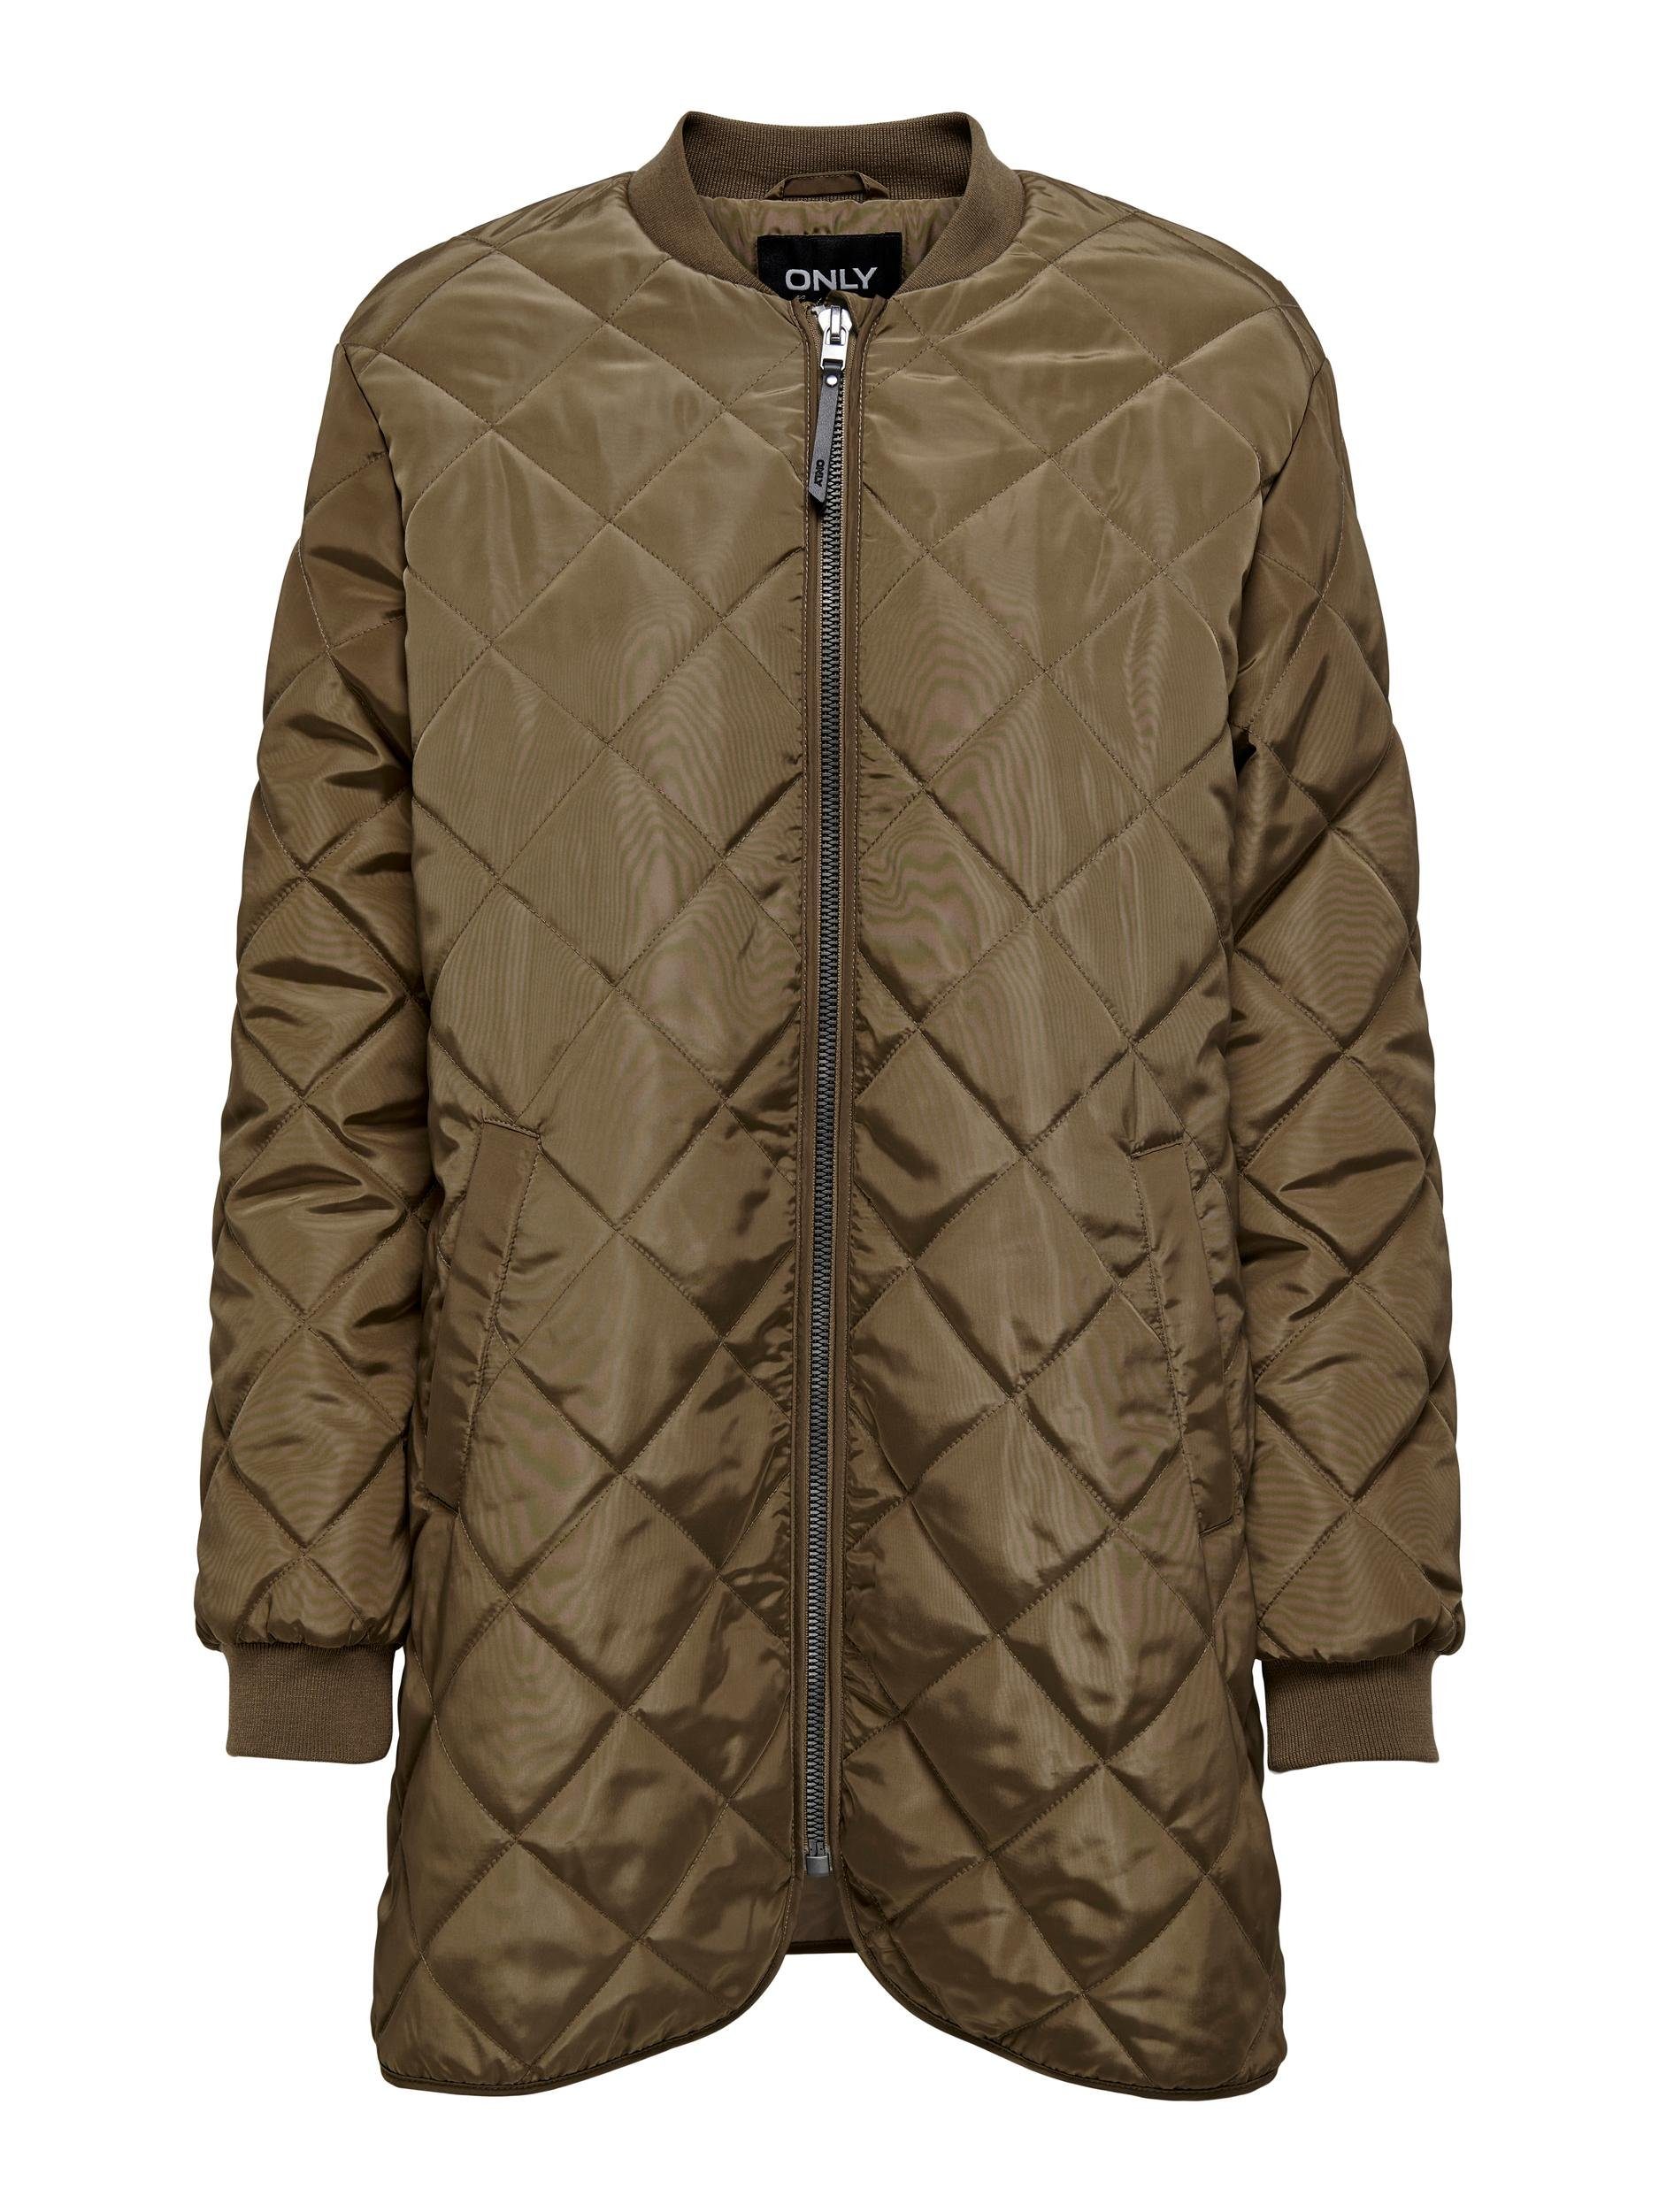 ONLY Steppjacke ONLNEWJESSICA QUILTED Otter JACKET OTW CC